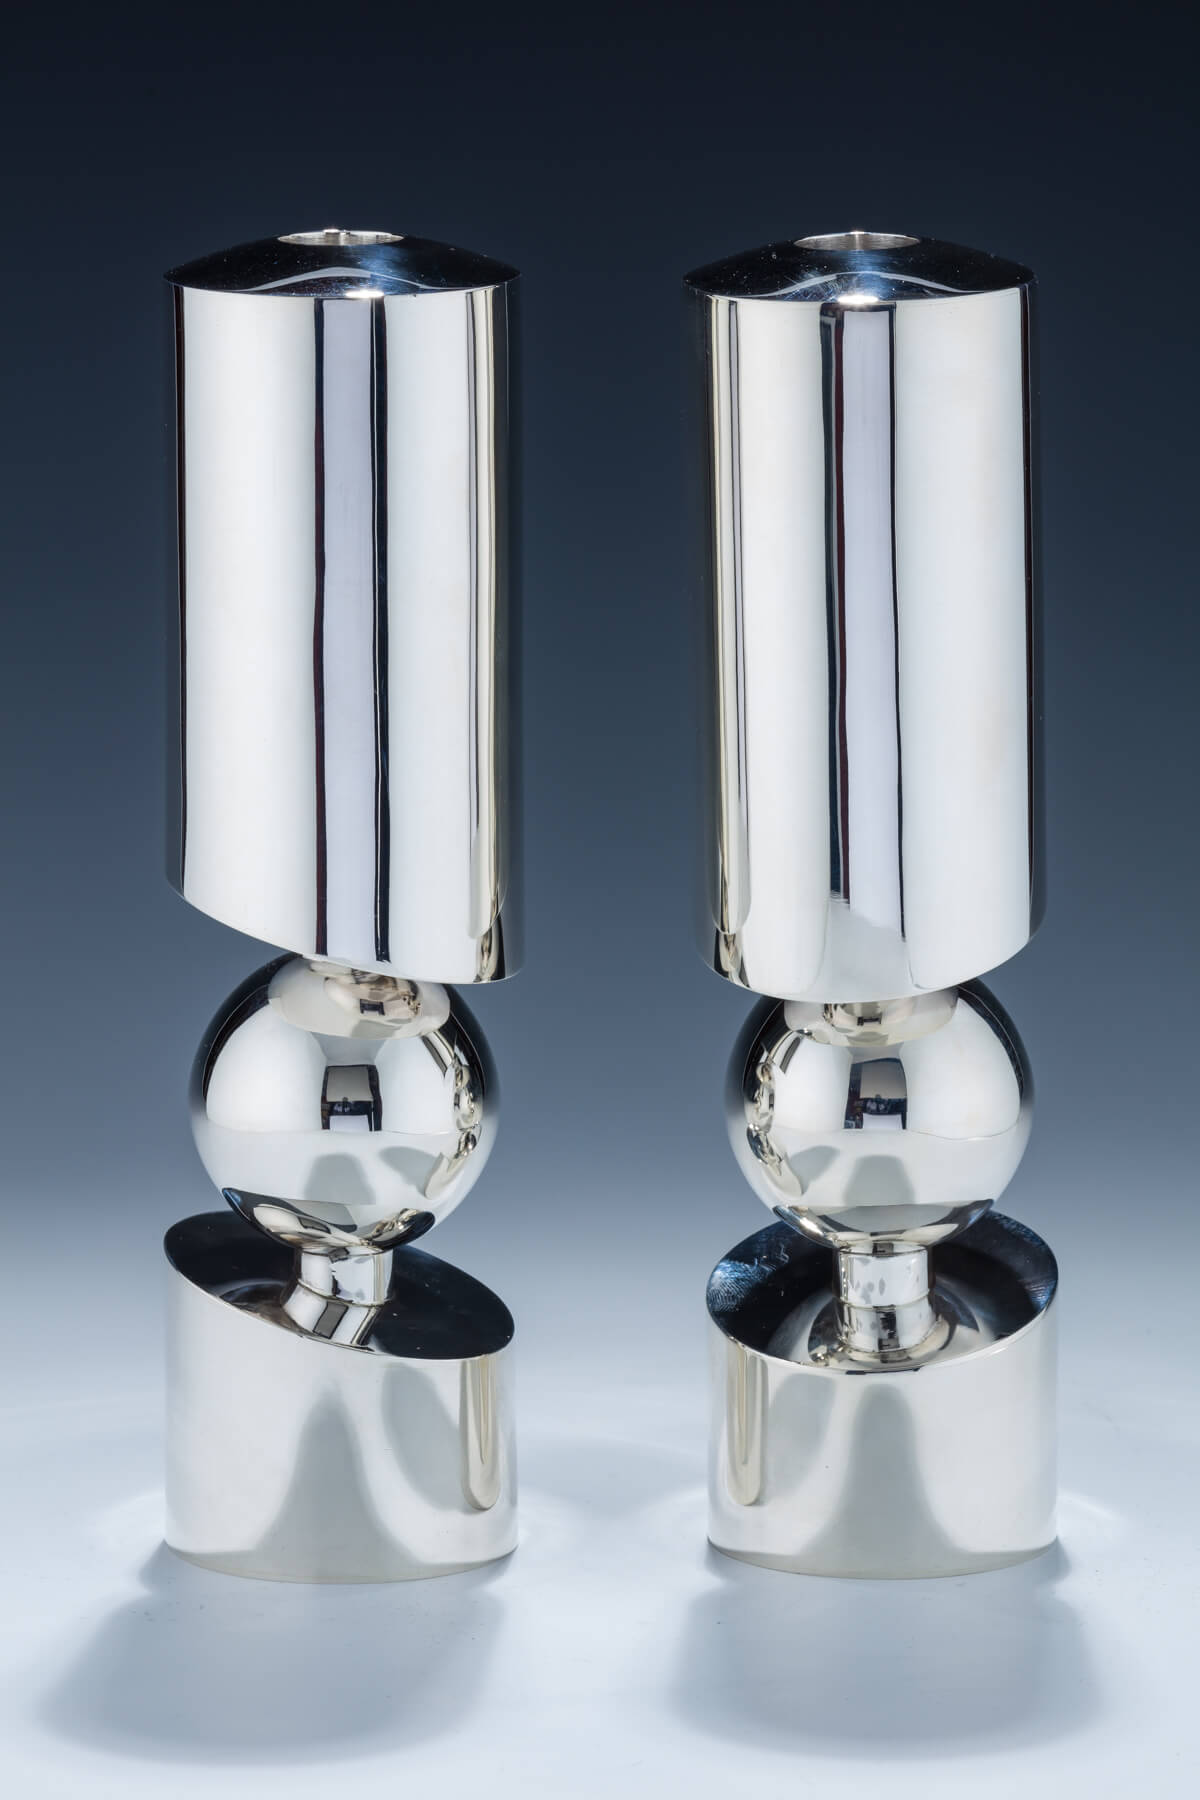 136. A Pair of Sterling Silver Candlesticks by Carmel Shabi